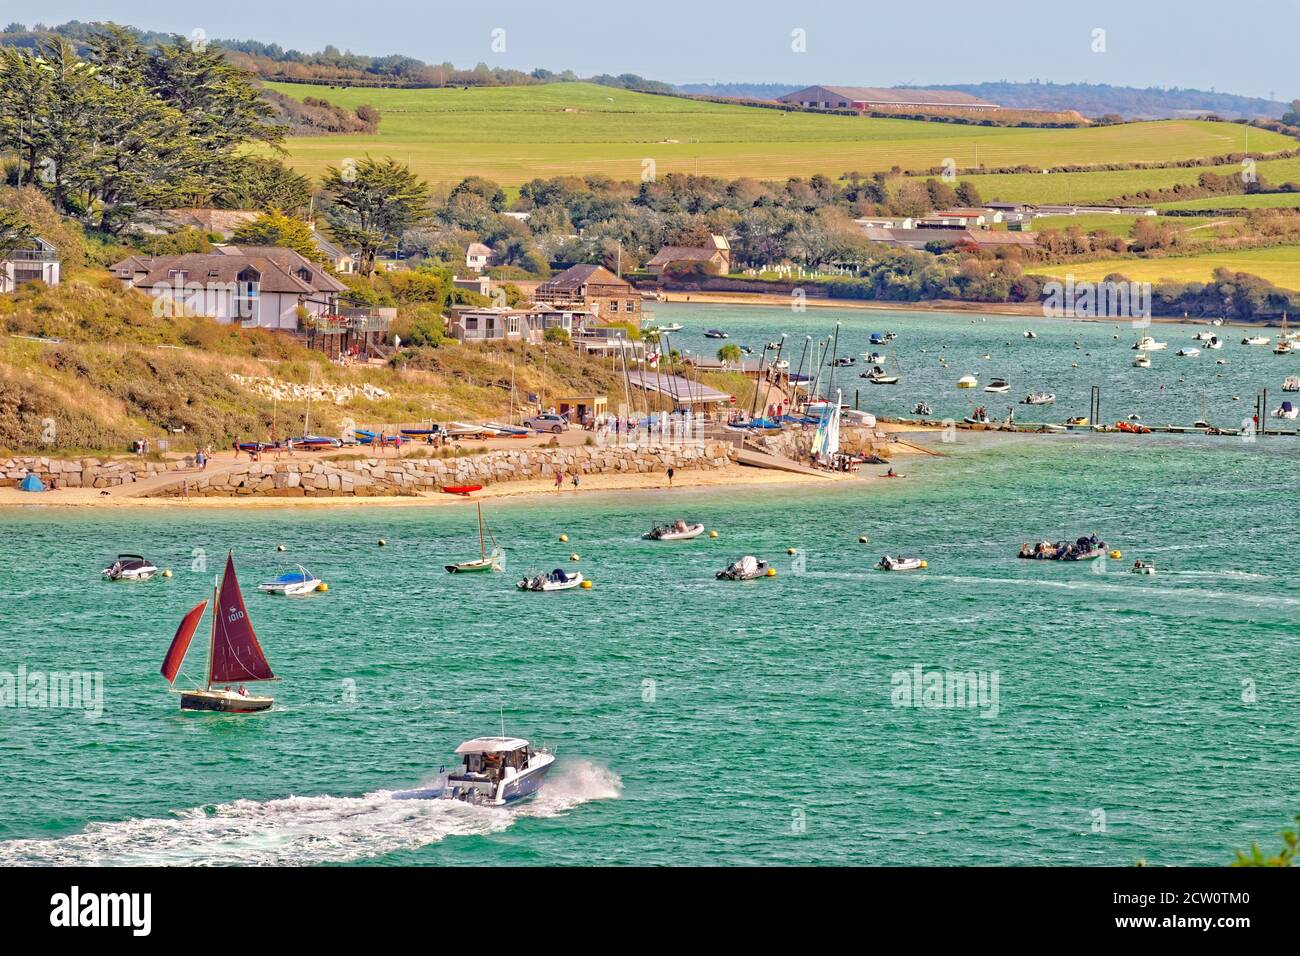 Rock village waterfront on the River Camel estuary, North Cornwall, England. Stock Photo